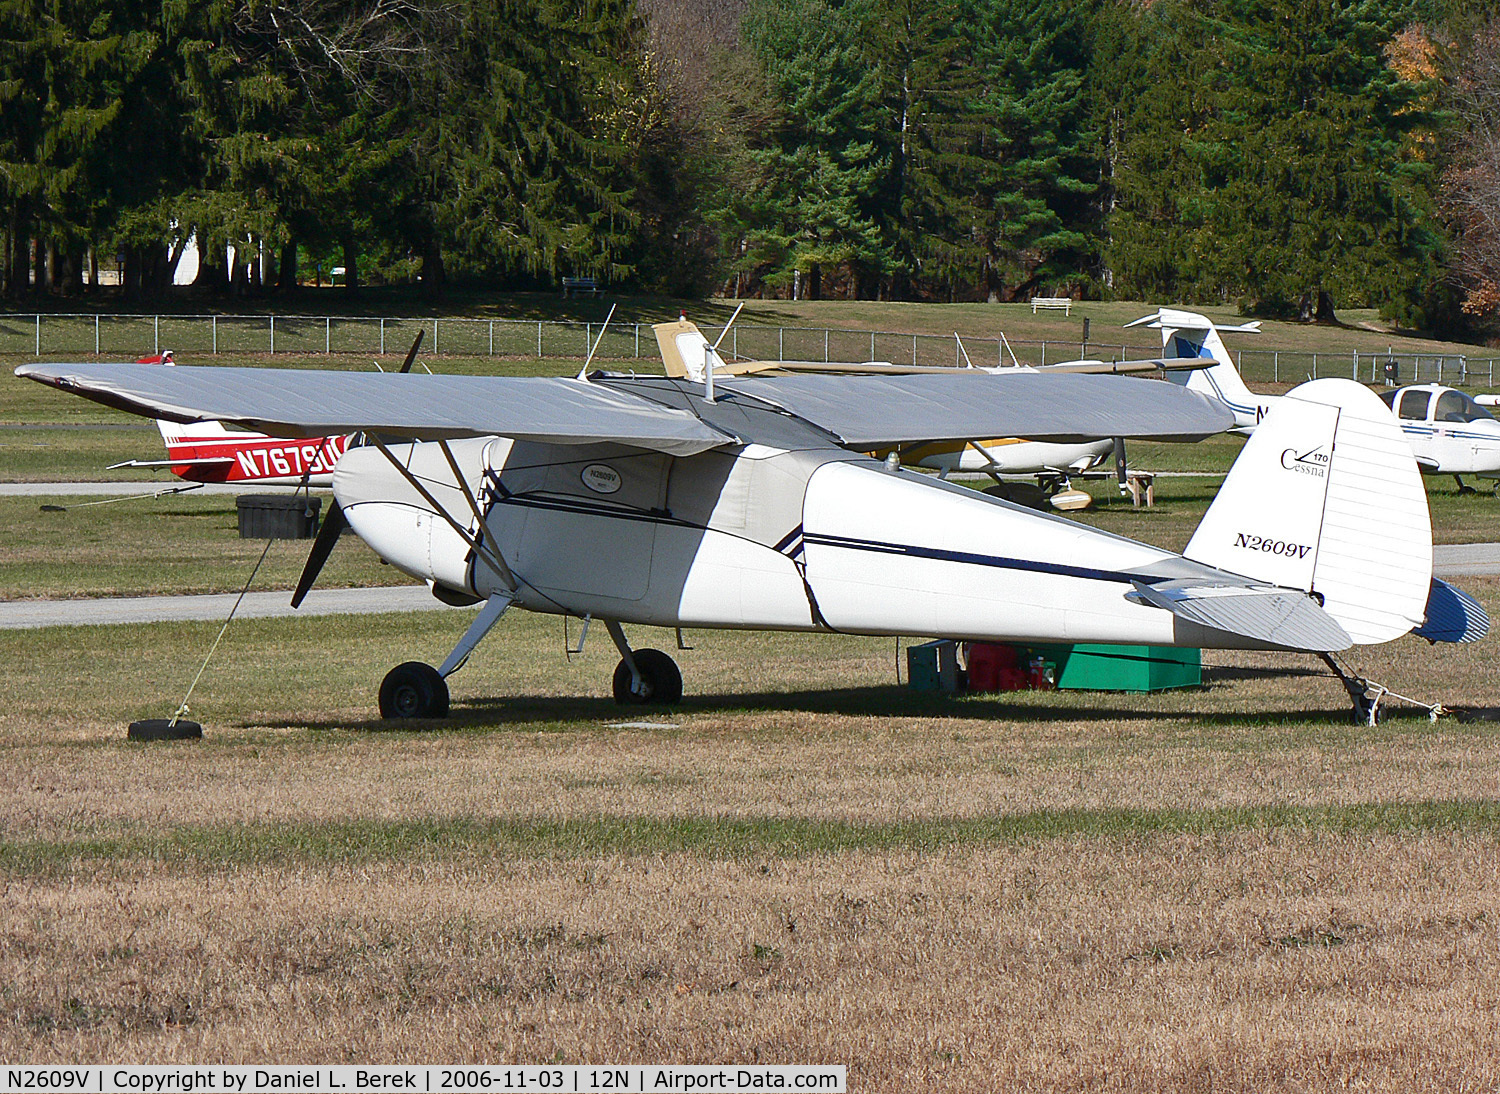 N2609V, 1948 Cessna 170 C/N 18119, Lovely 1948 Cessna 170 flew down to New Jersey from New Hampshire.